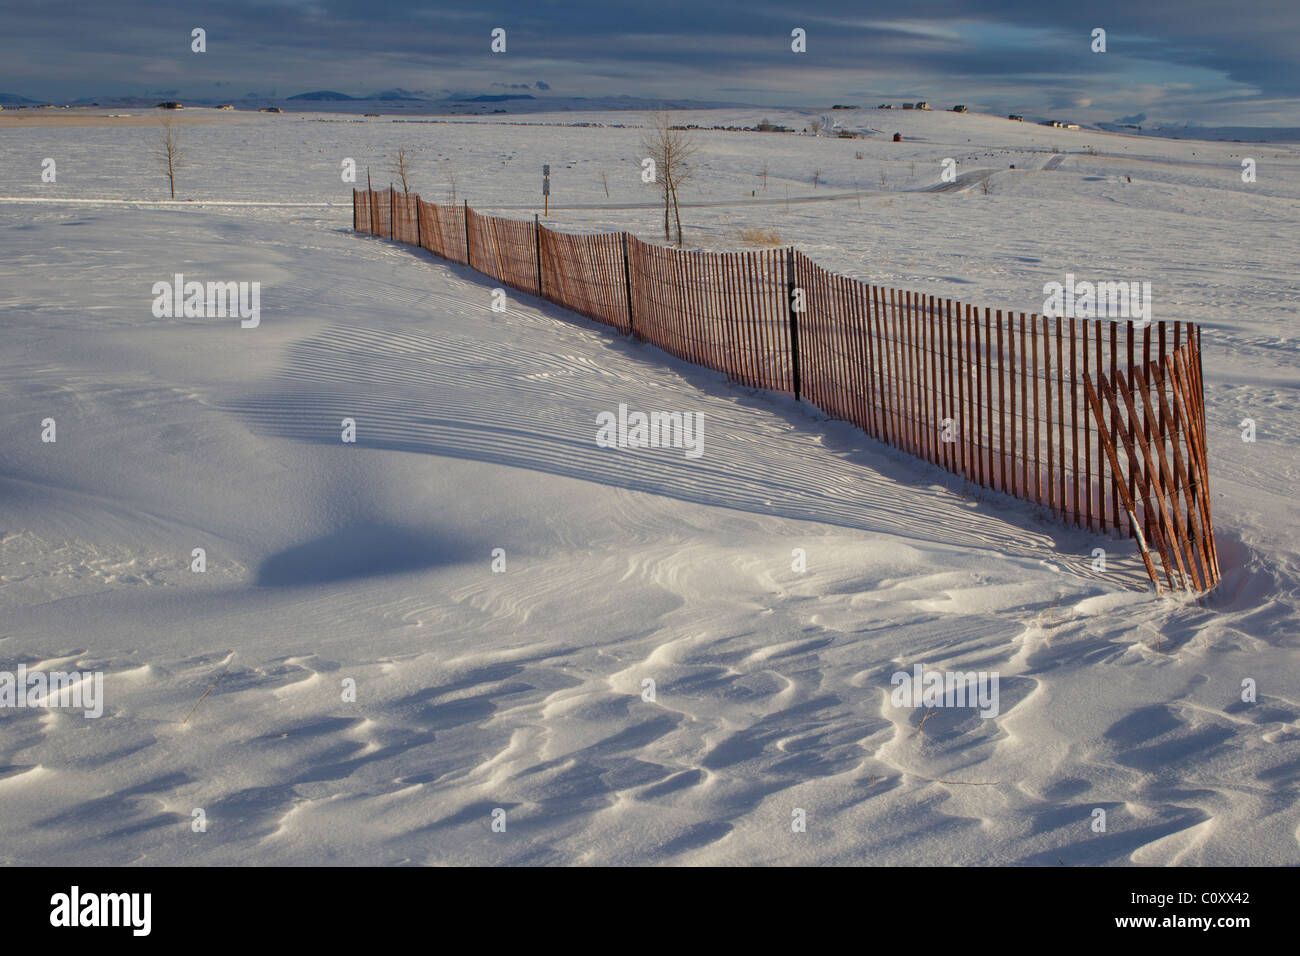 Rough scallops in drifted snow at the end of a fence and smooth drifts behind the snow fence show its impact on wind patterns. Stock Photo